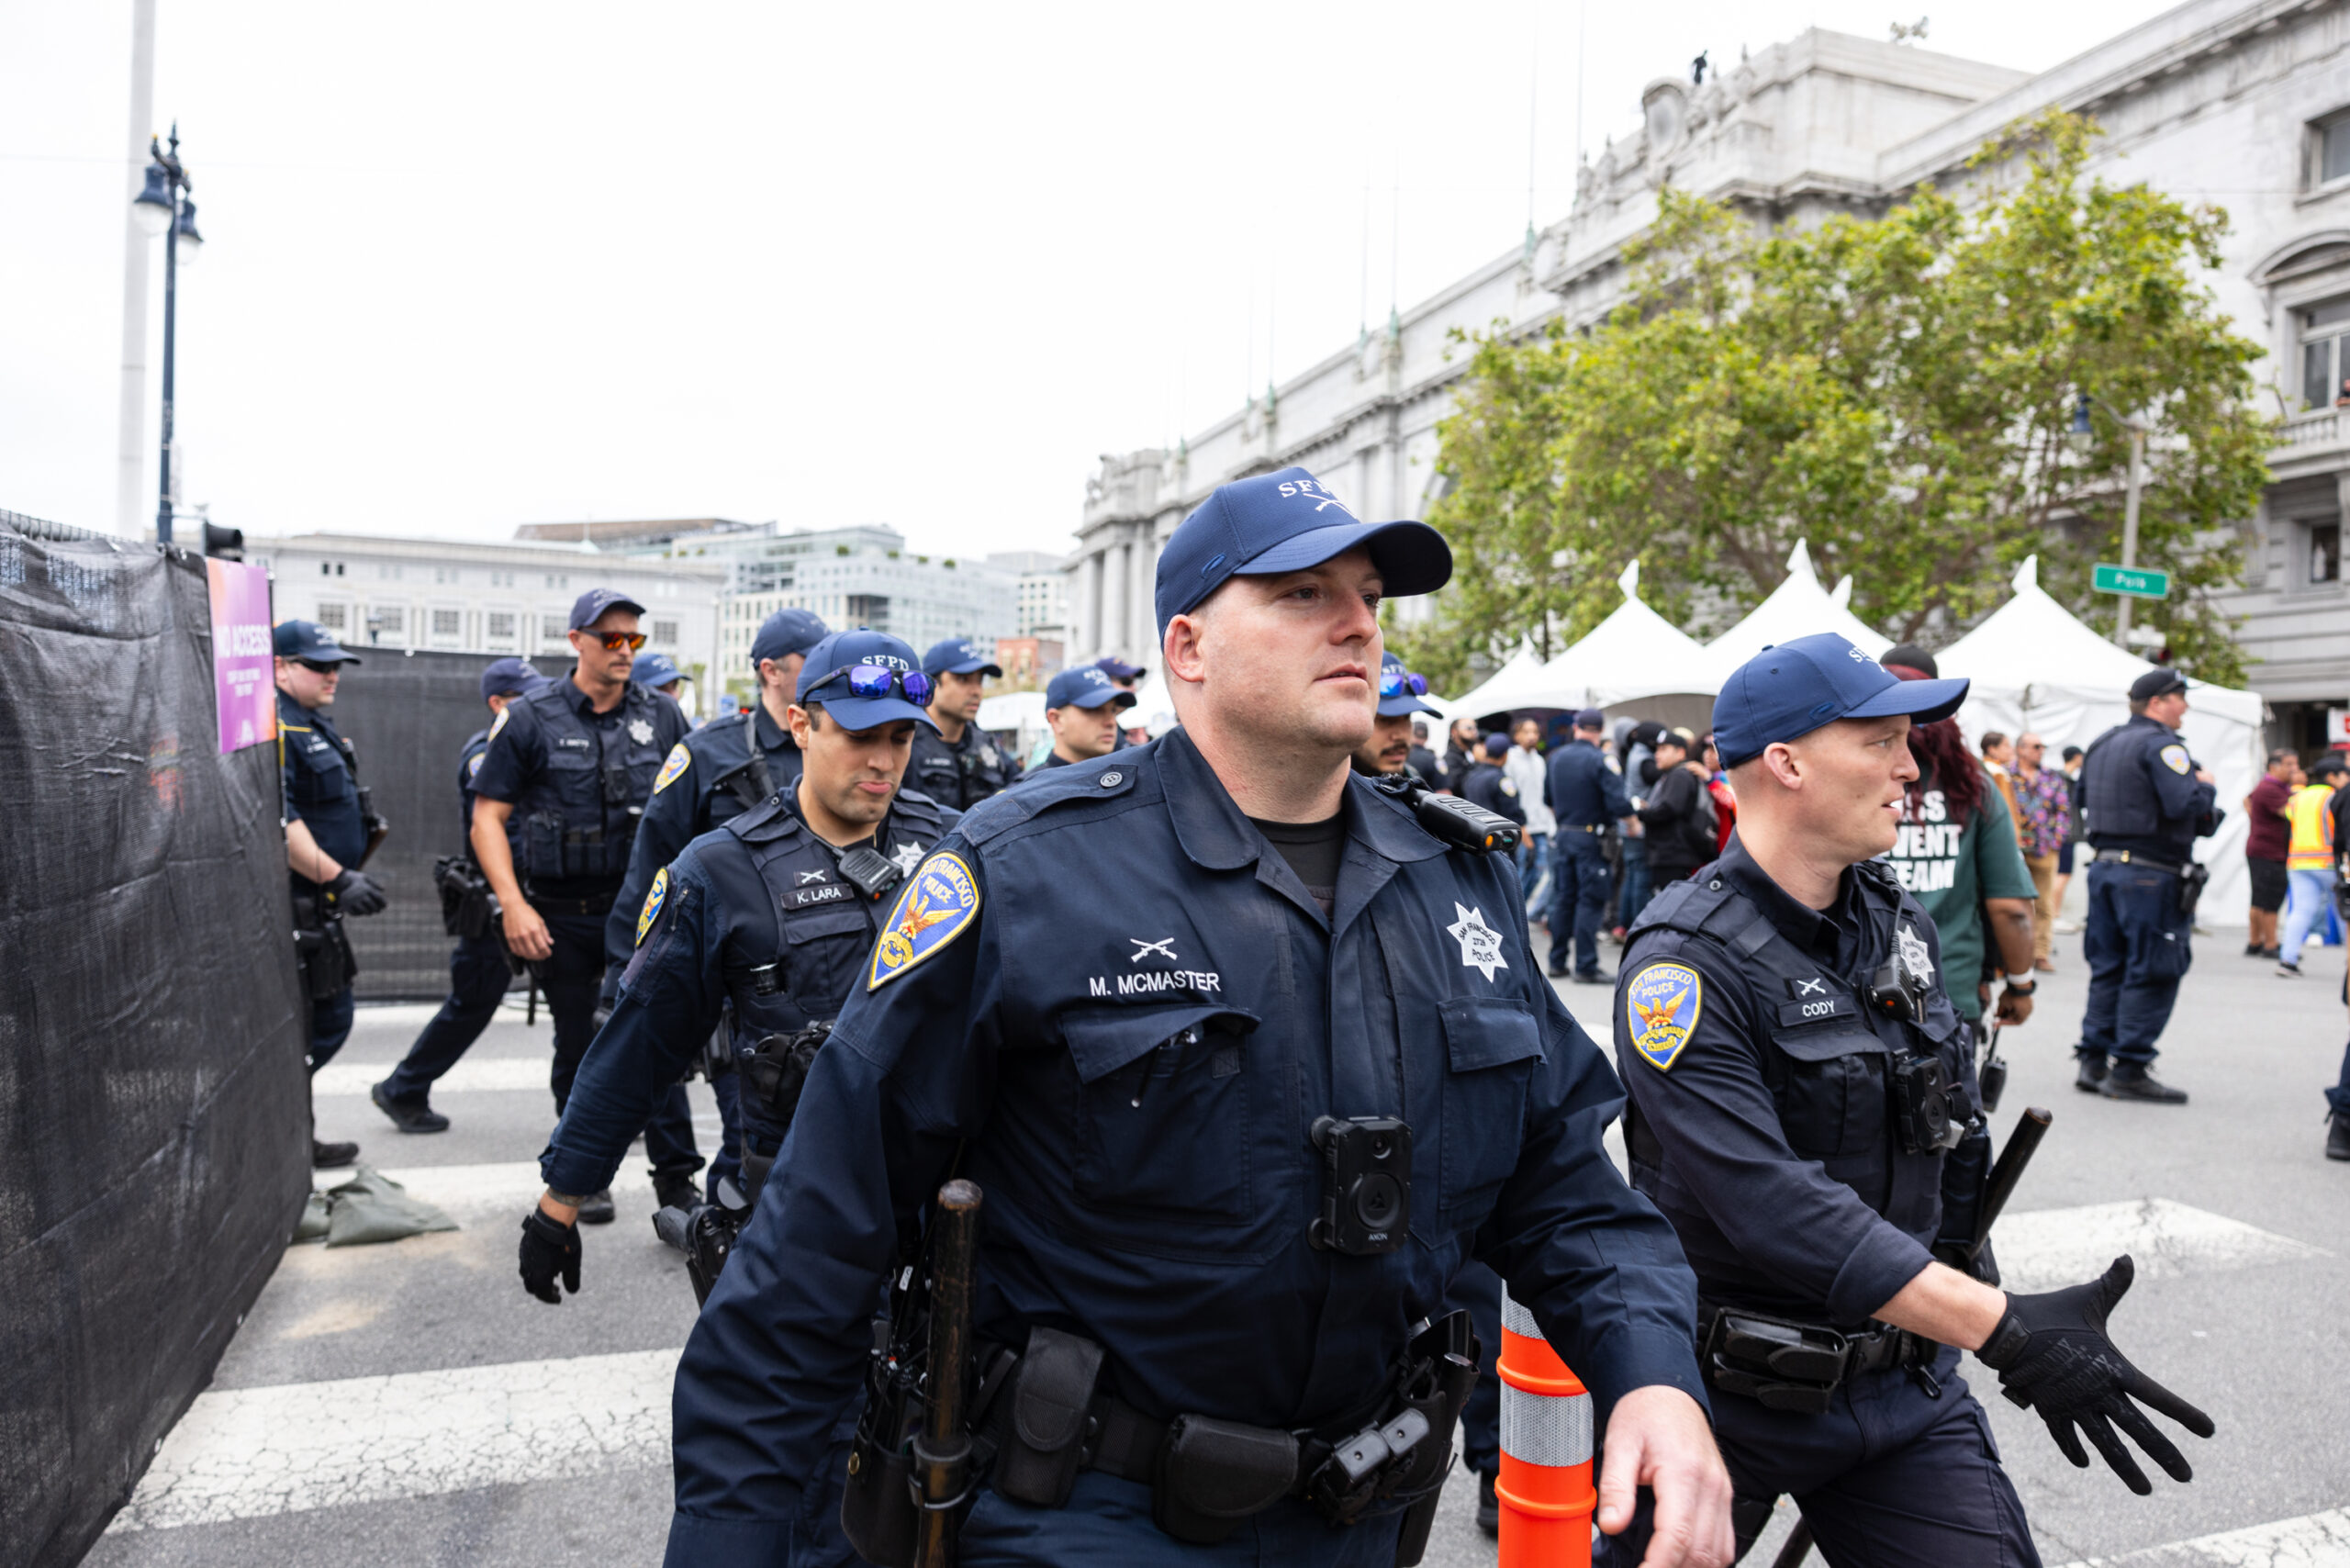 A group of police officers in uniform patrol an event, with a crowd and tents in the background.